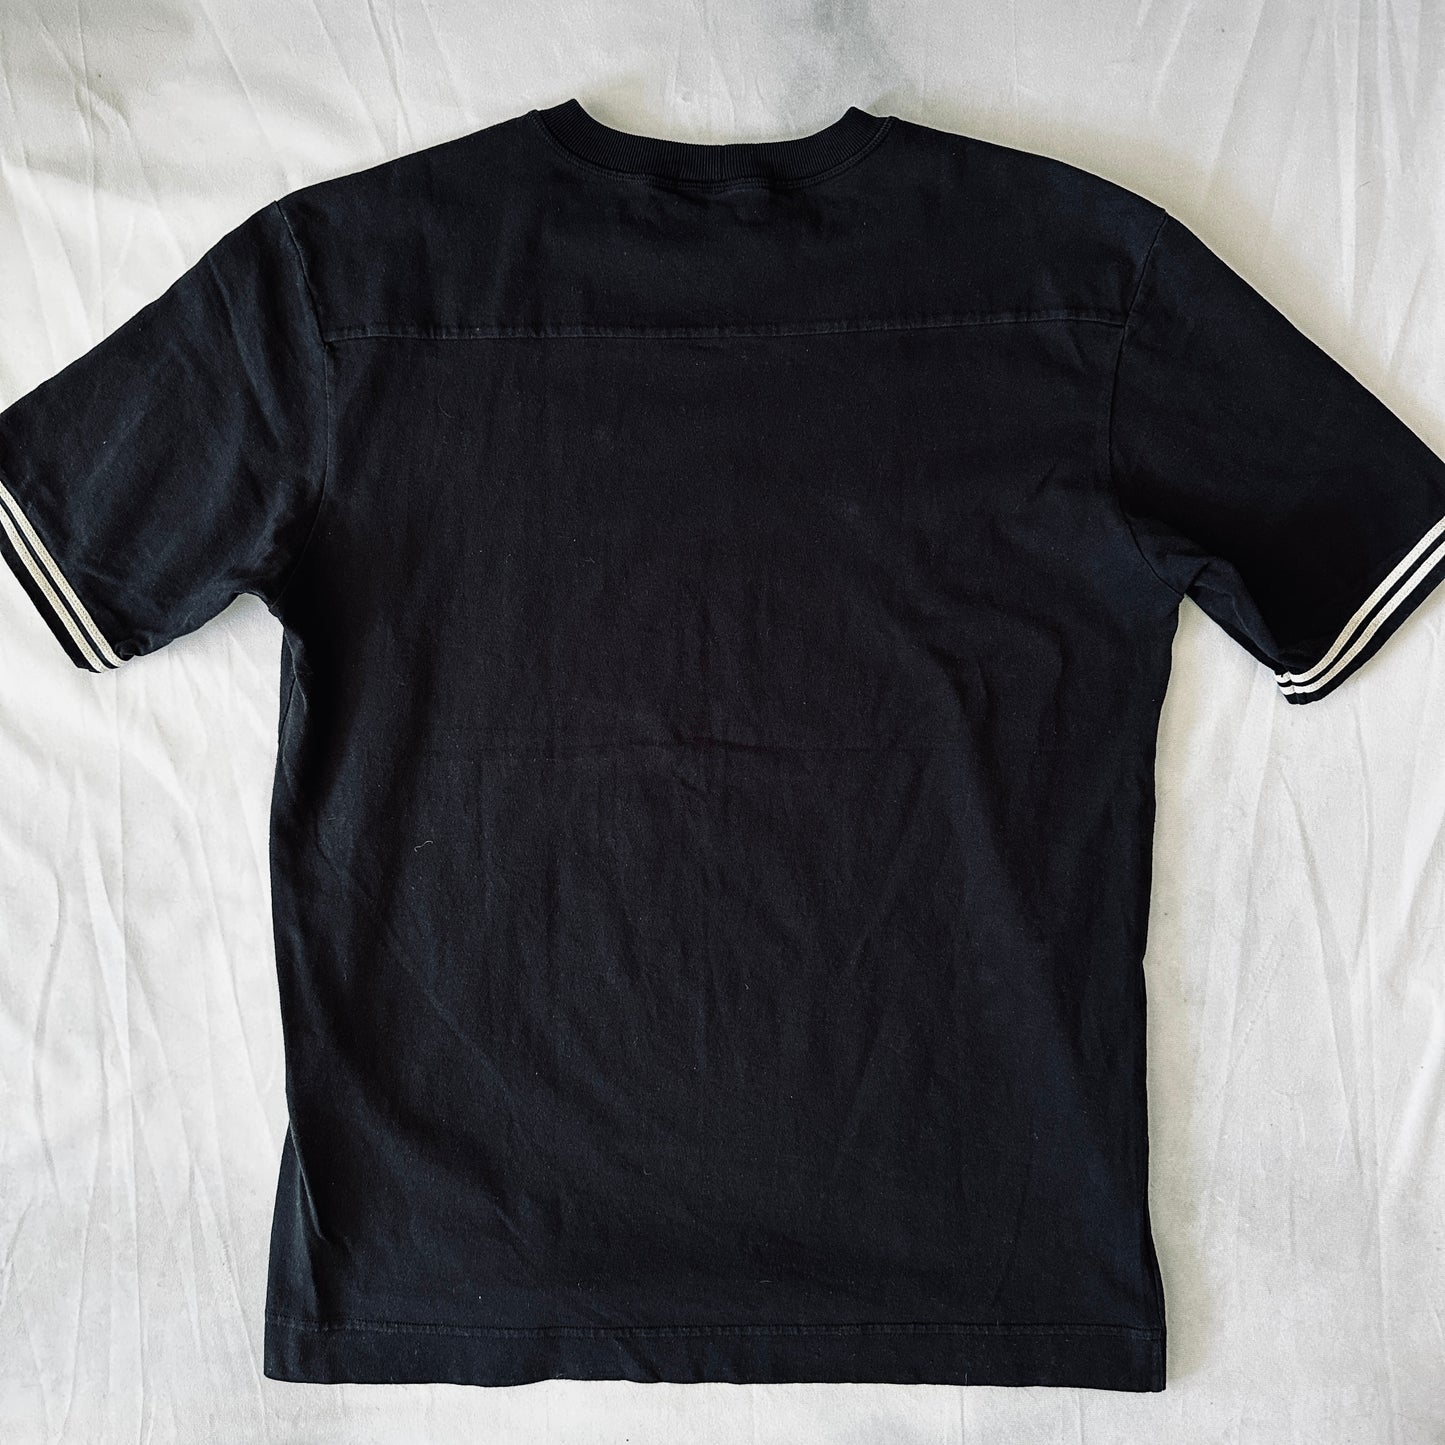 Stone Island T-Shirt - L - Made in Italy